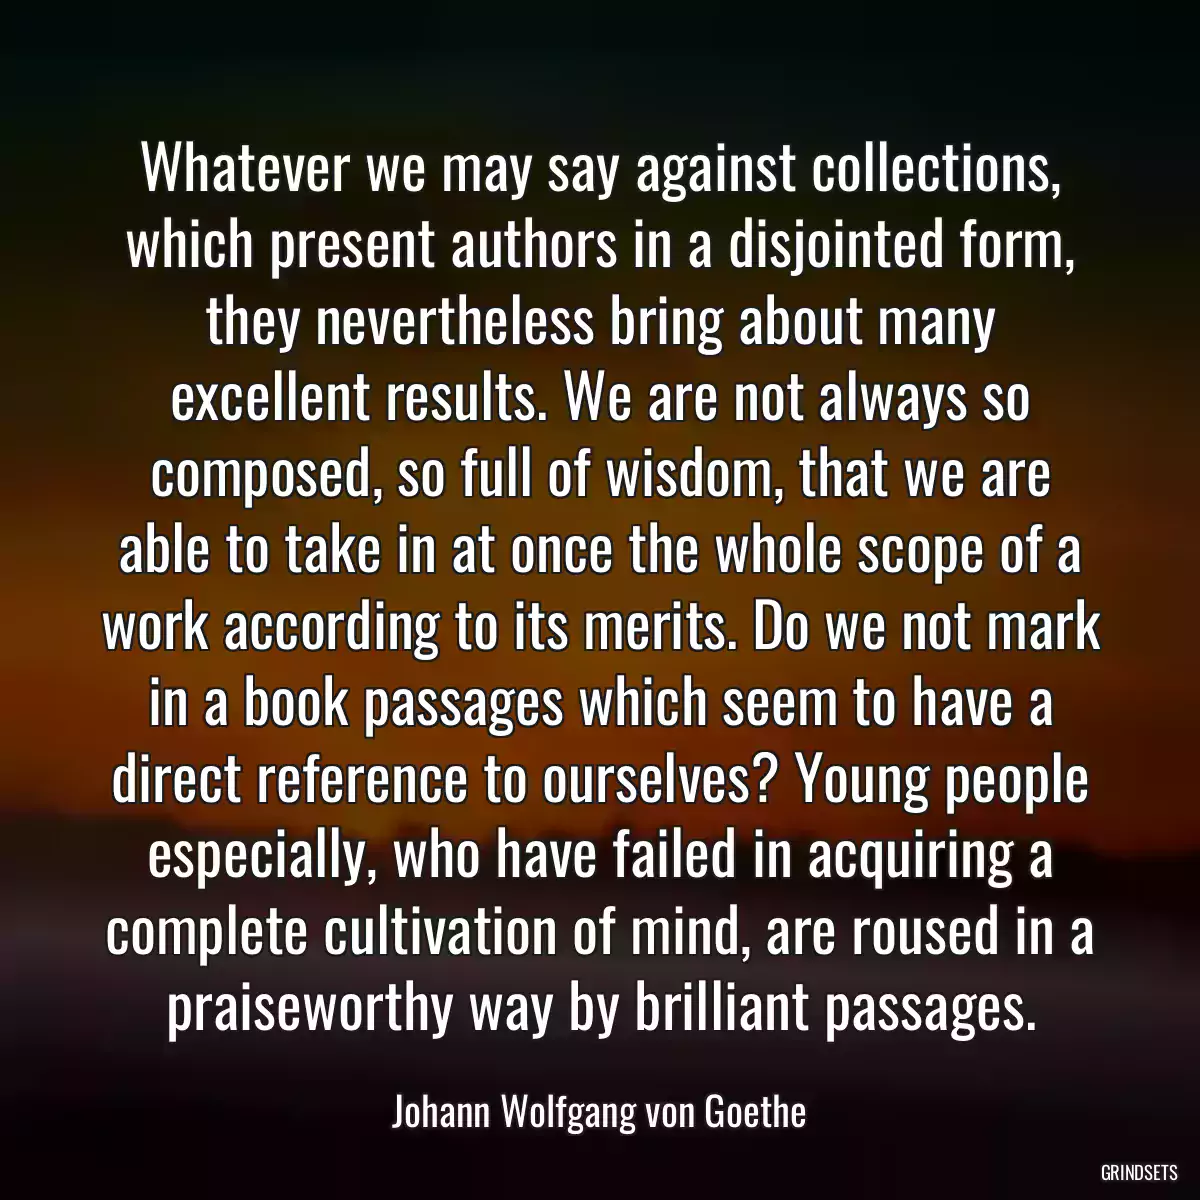 Whatever we may say against collections, which present authors in a disjointed form, they nevertheless bring about many excellent results. We are not always so composed, so full of wisdom, that we are able to take in at once the whole scope of a work according to its merits. Do we not mark in a book passages which seem to have a direct reference to ourselves? Young people especially, who have failed in acquiring a complete cultivation of mind, are roused in a praiseworthy way by brilliant passages.